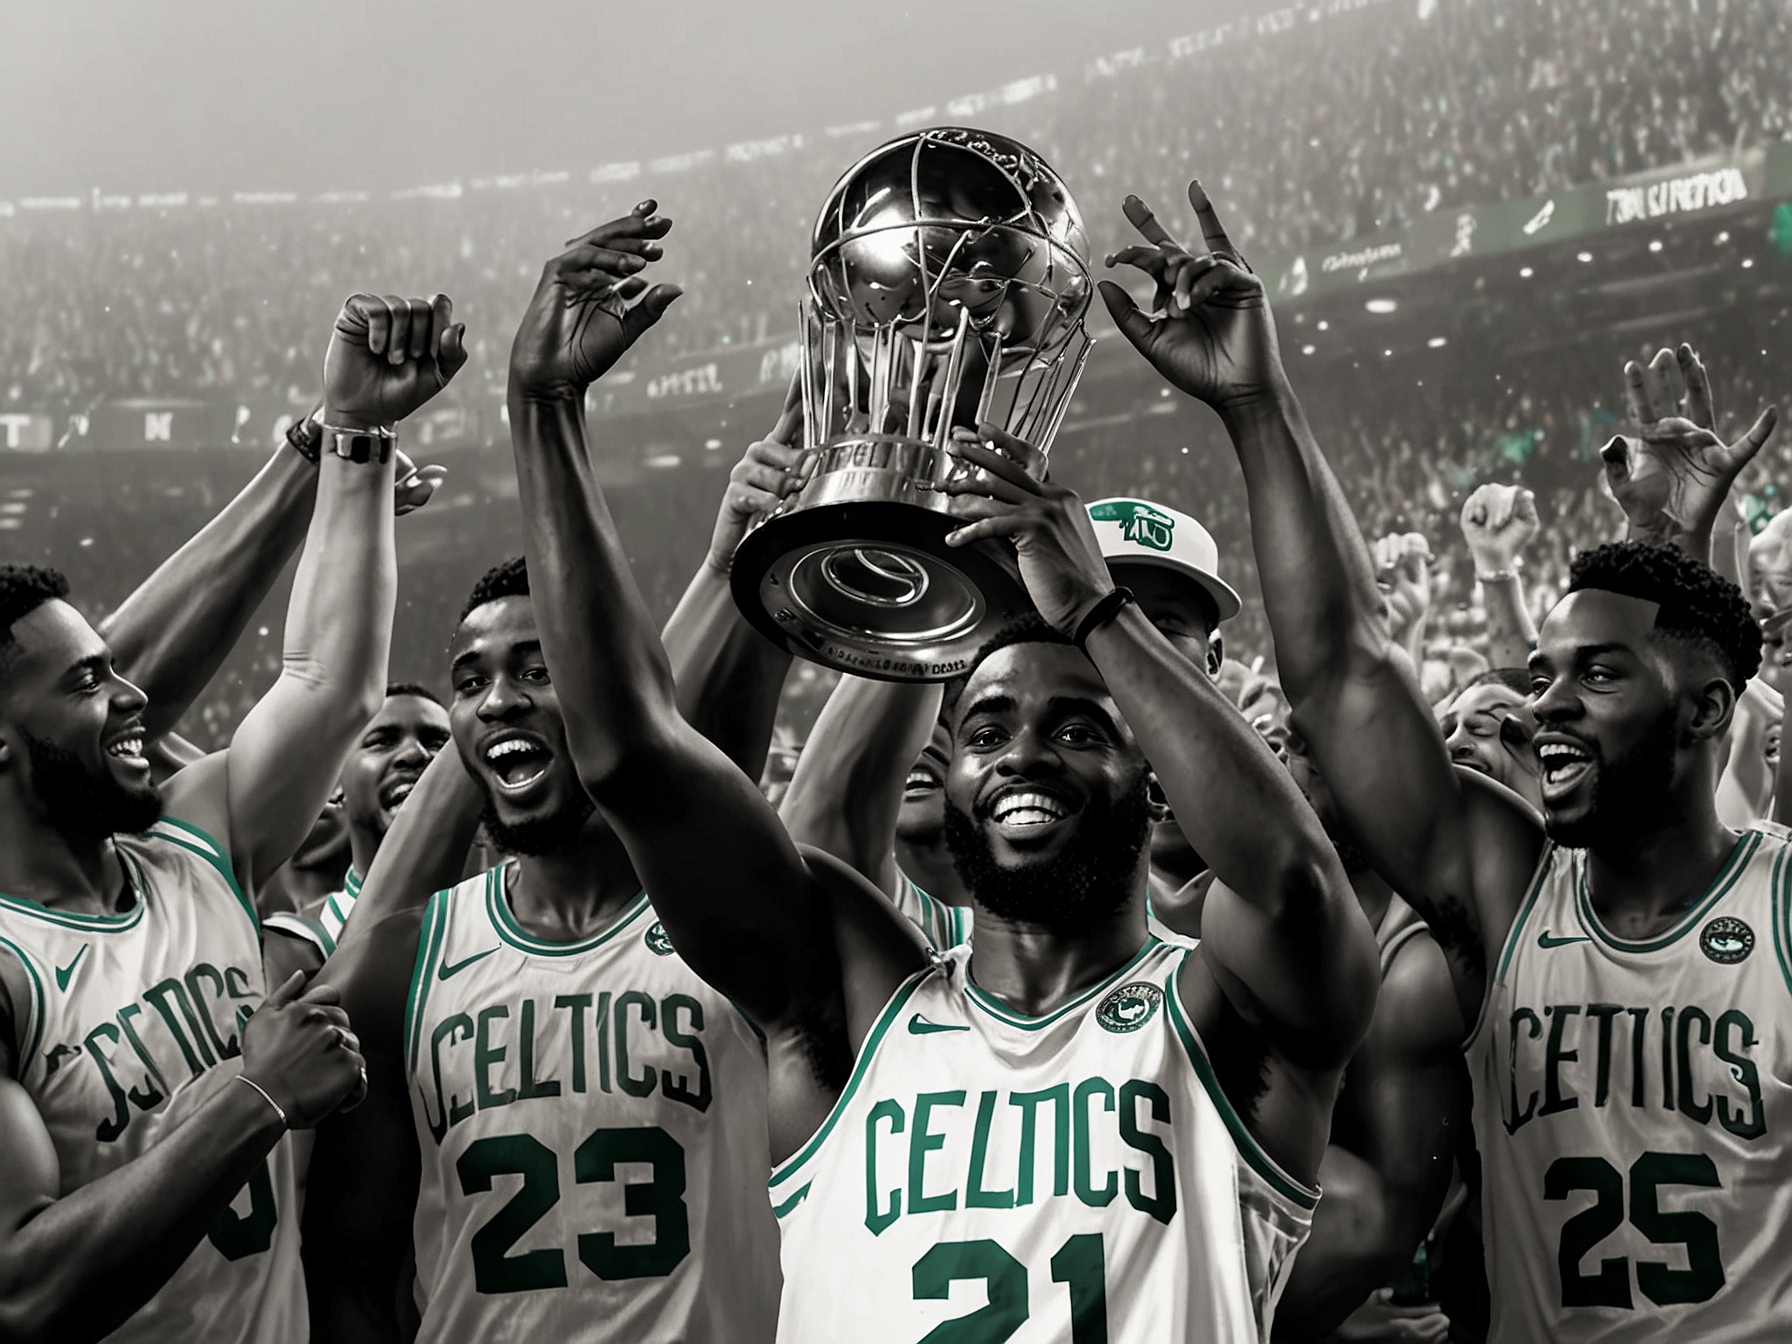 Jaylen Brown holding the NBA Finals MVP trophy, surrounded by teammates celebrating the Boston Celtics' first championship win since 2008 after defeating the Dallas Mavericks.